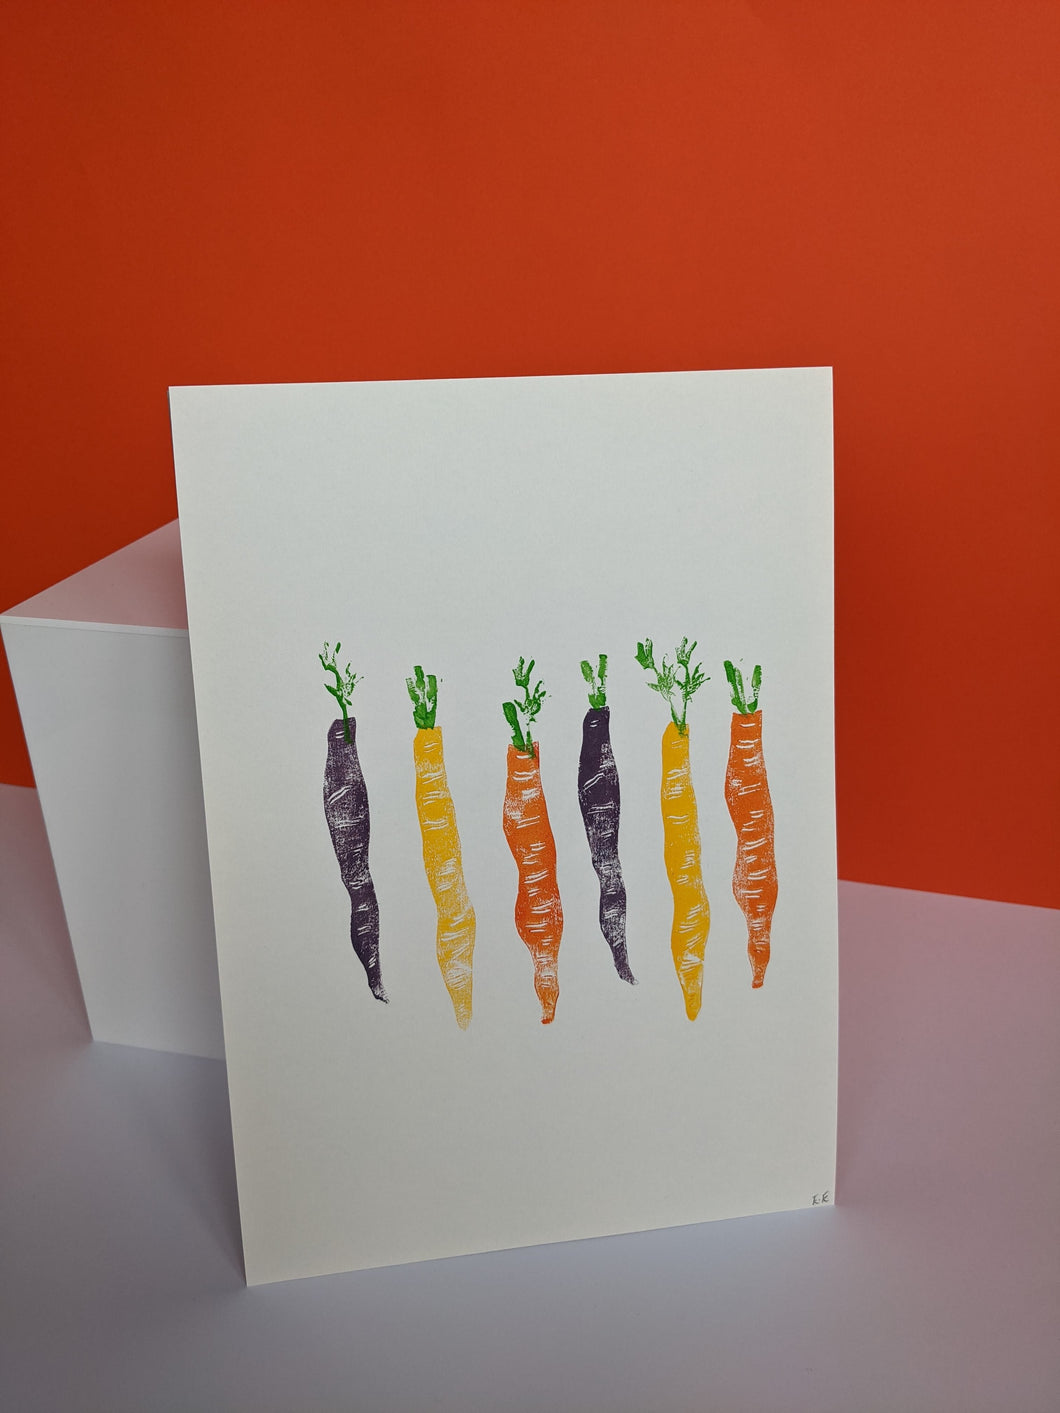 A white print with six colourful carrots printed on in shades of purple, yellow and orange